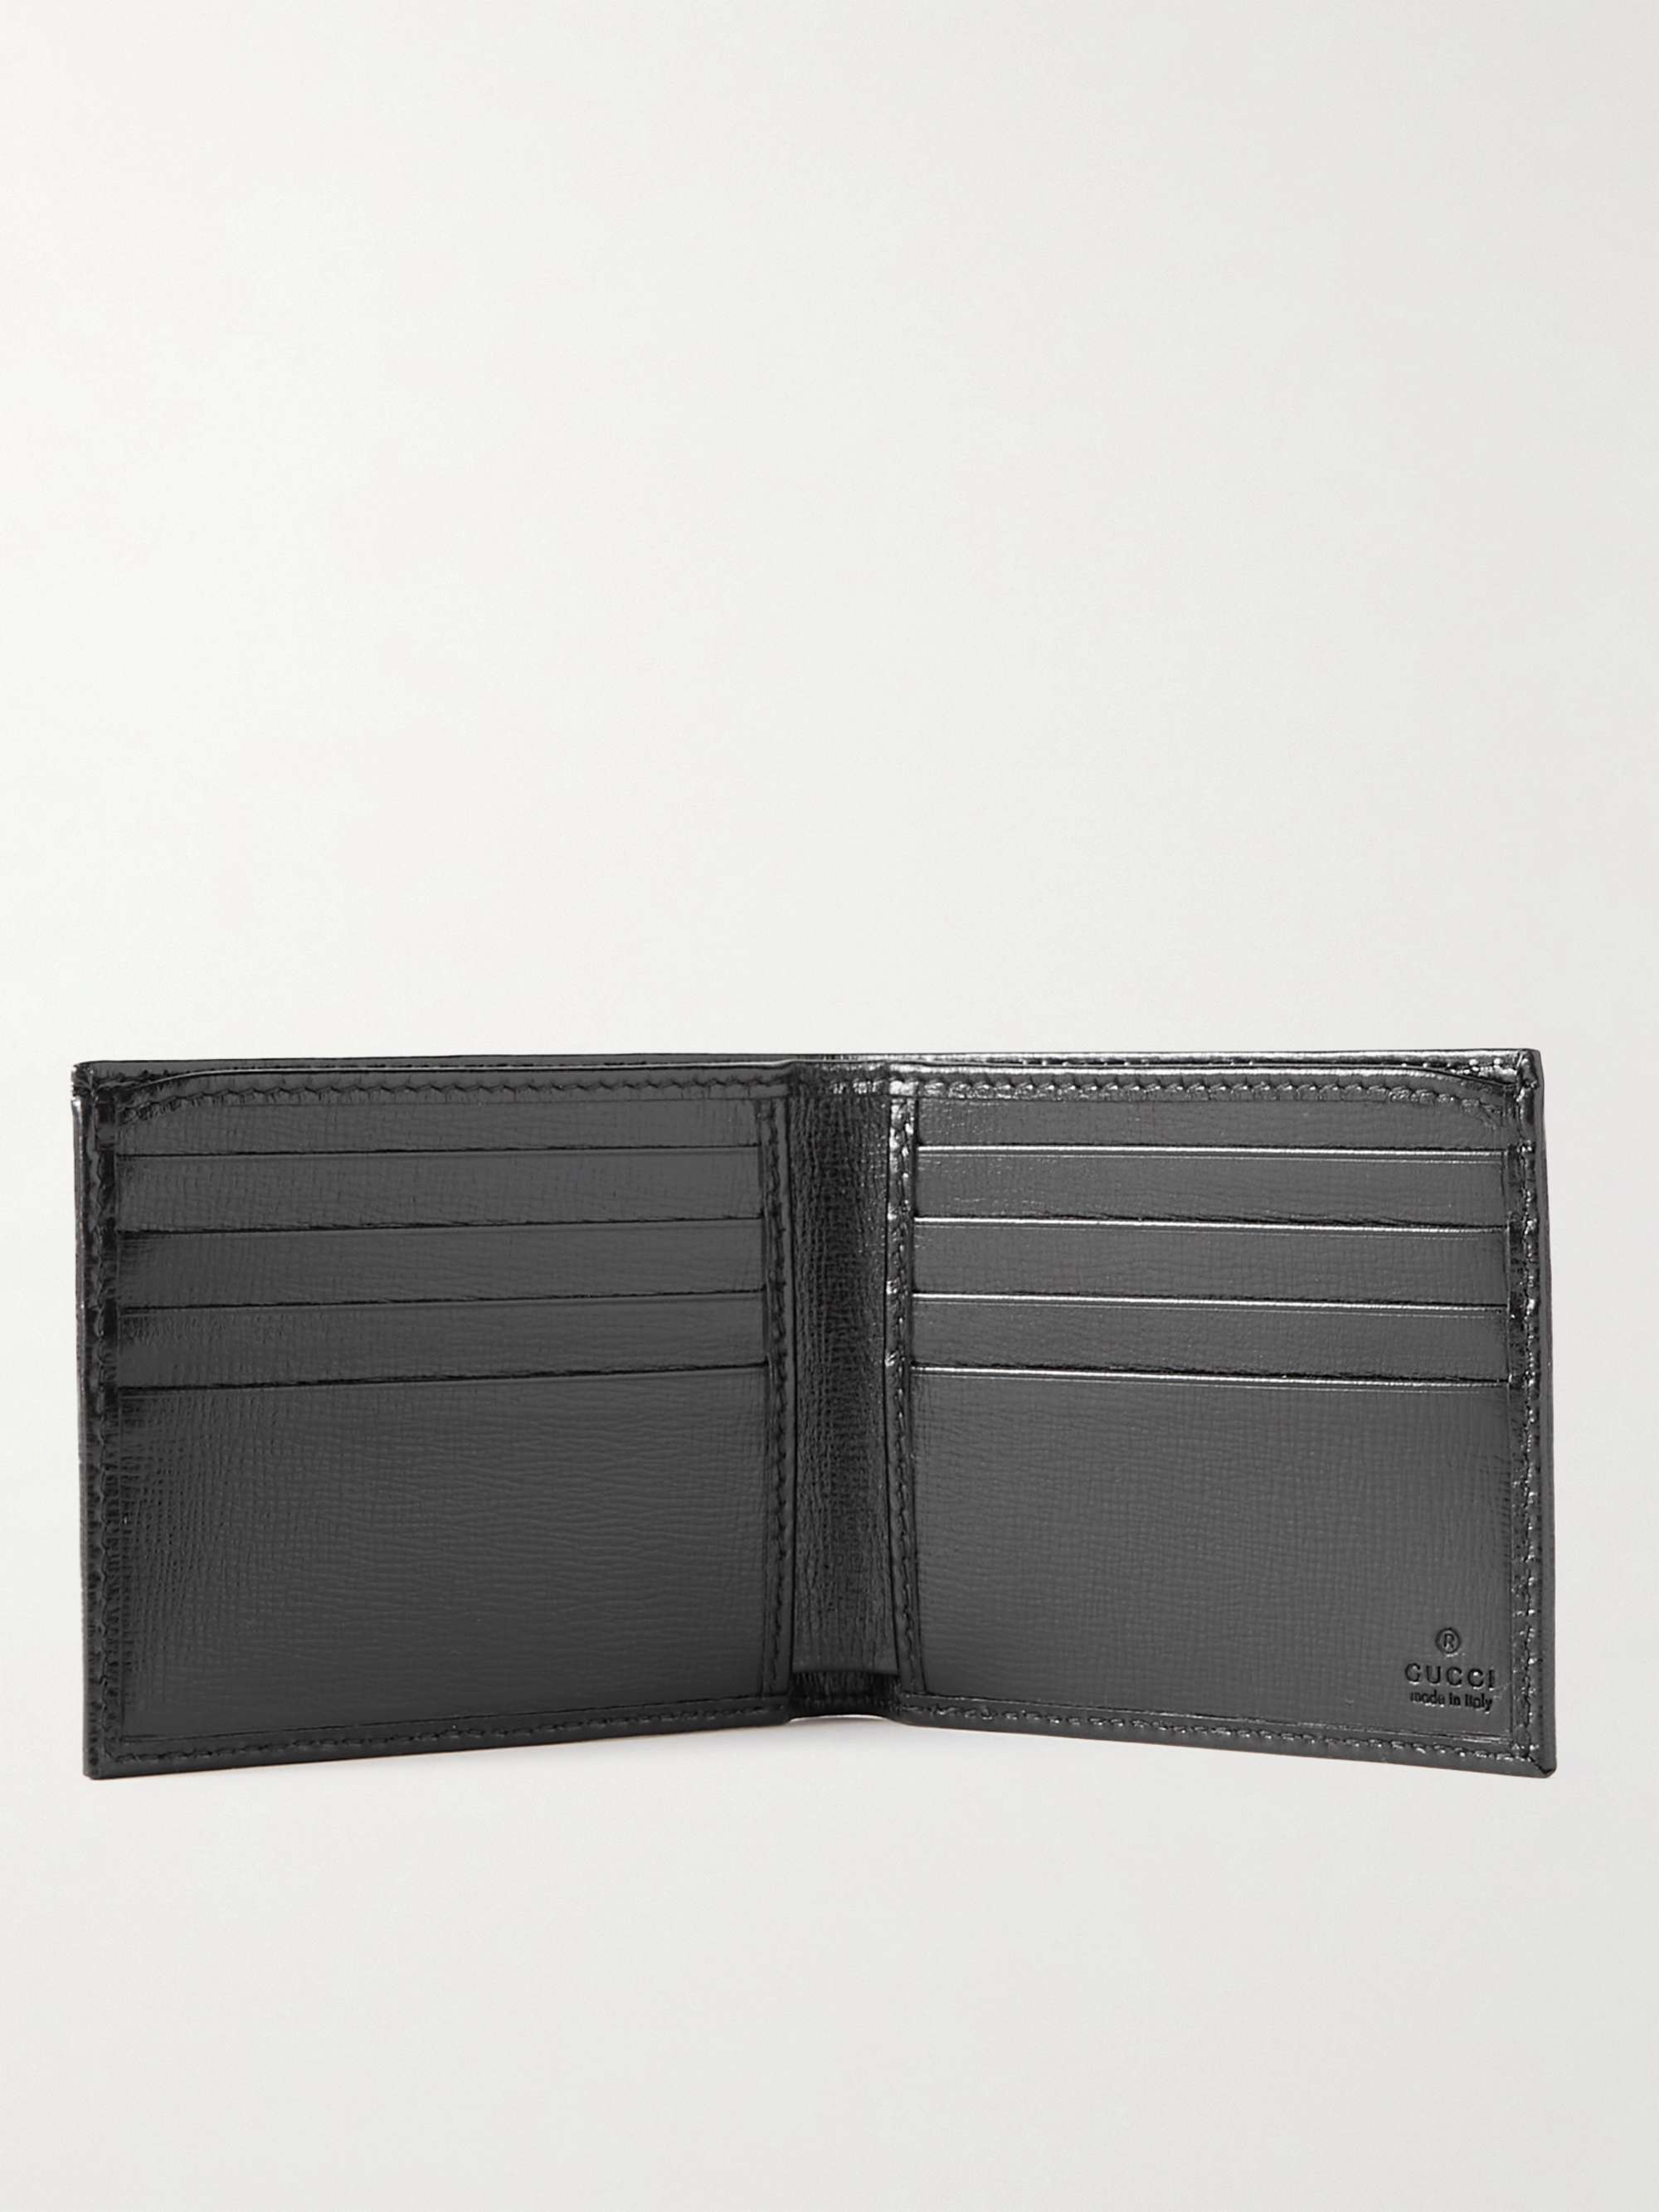 jury expositie olie GUCCI Leather-Trimmed Monogrammed Supreme Coated-Canvas Billfold Wallet |  MR PORTER